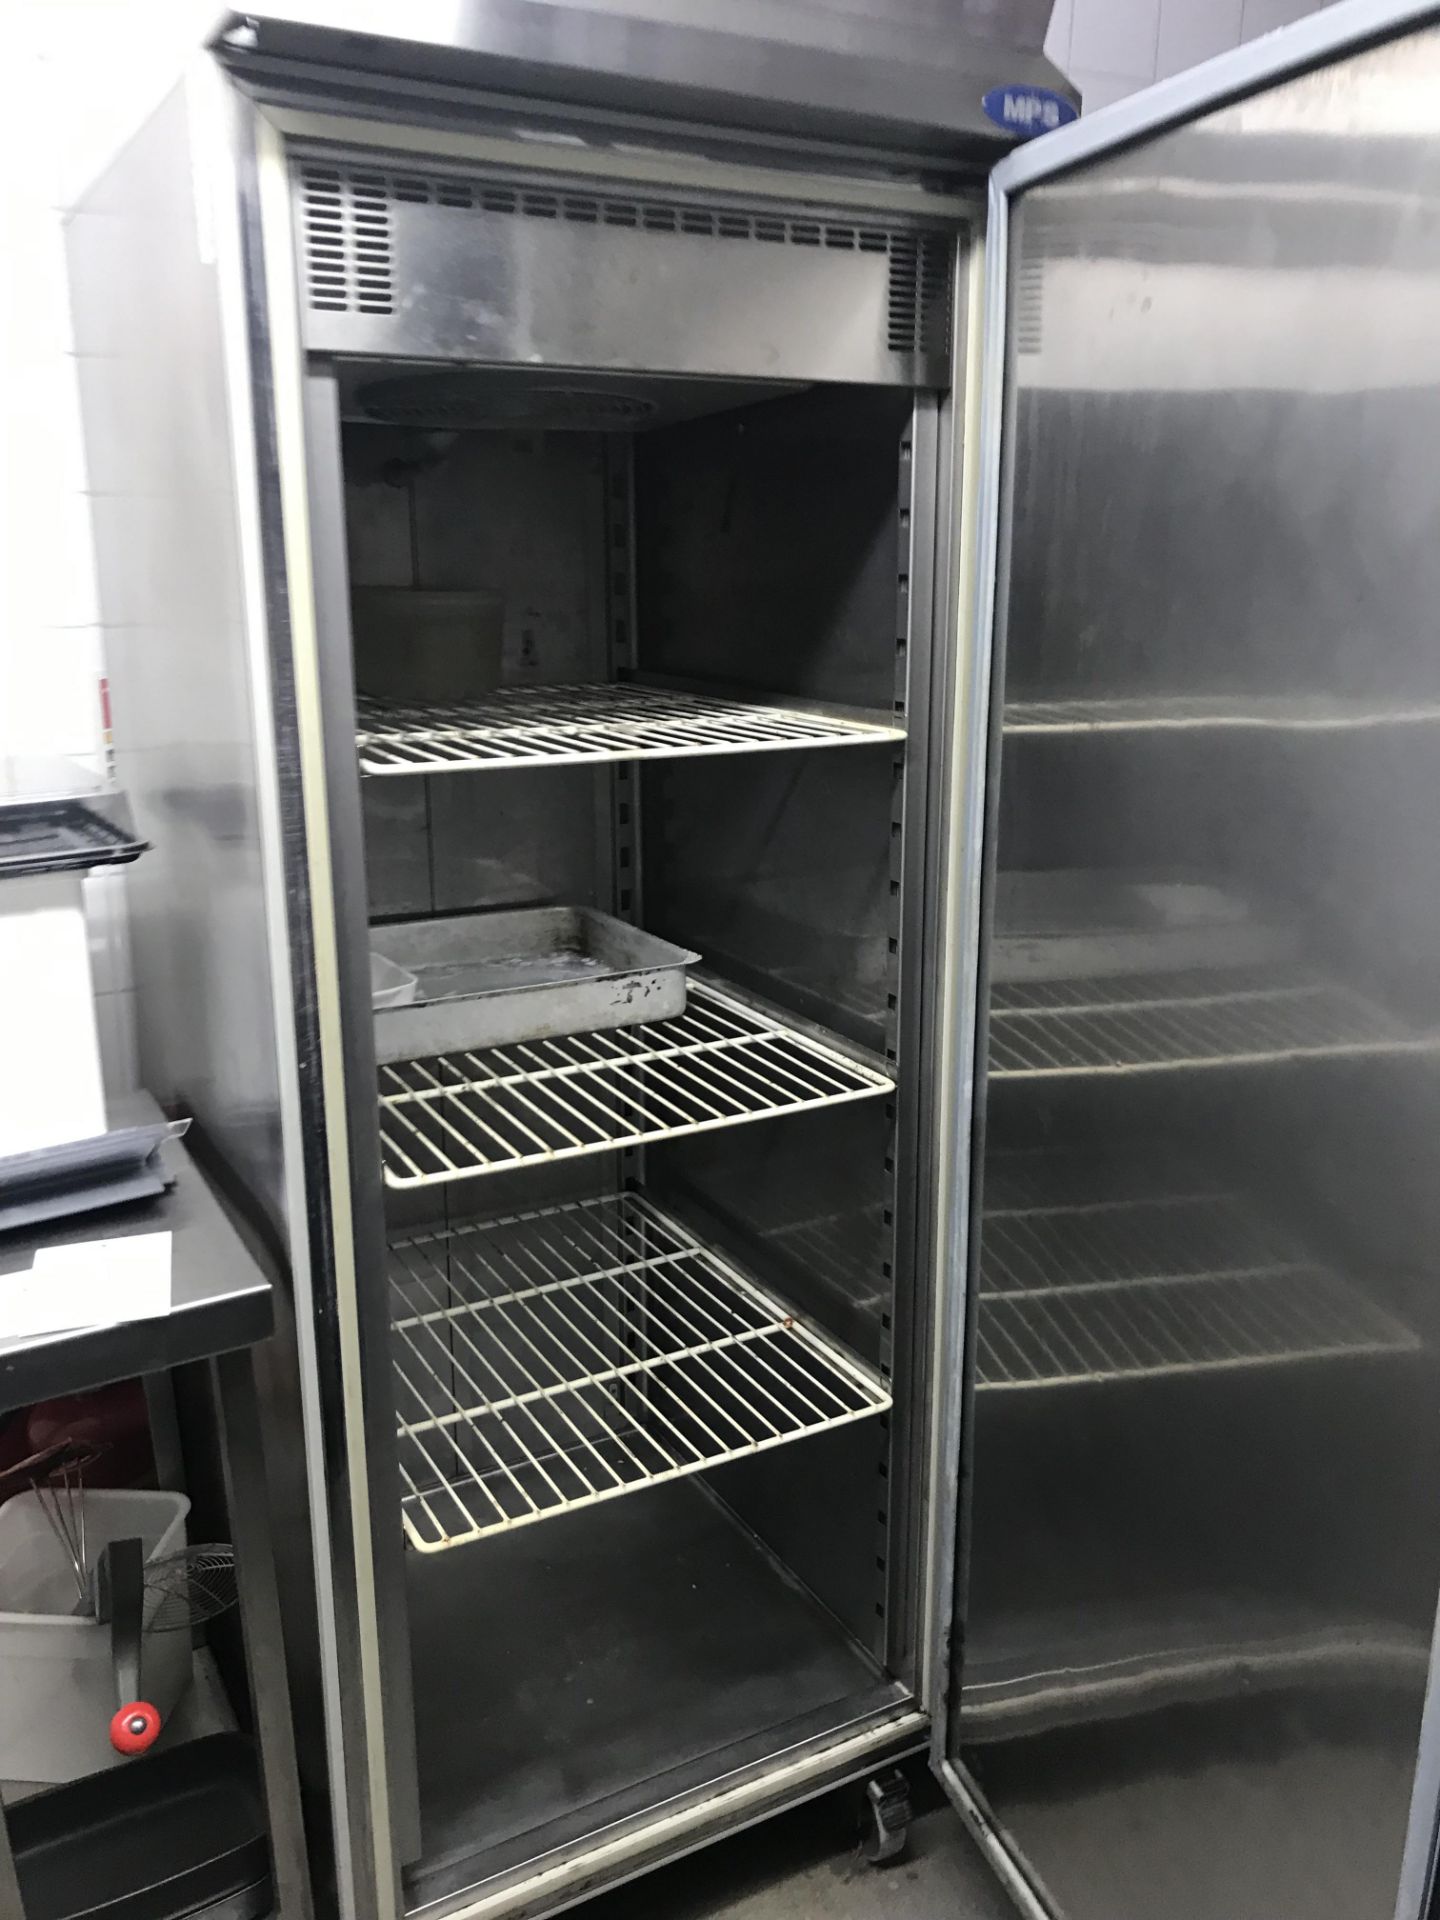 MPS Stainless Steel Upright Chiller with 3 Shelves - Image 4 of 5